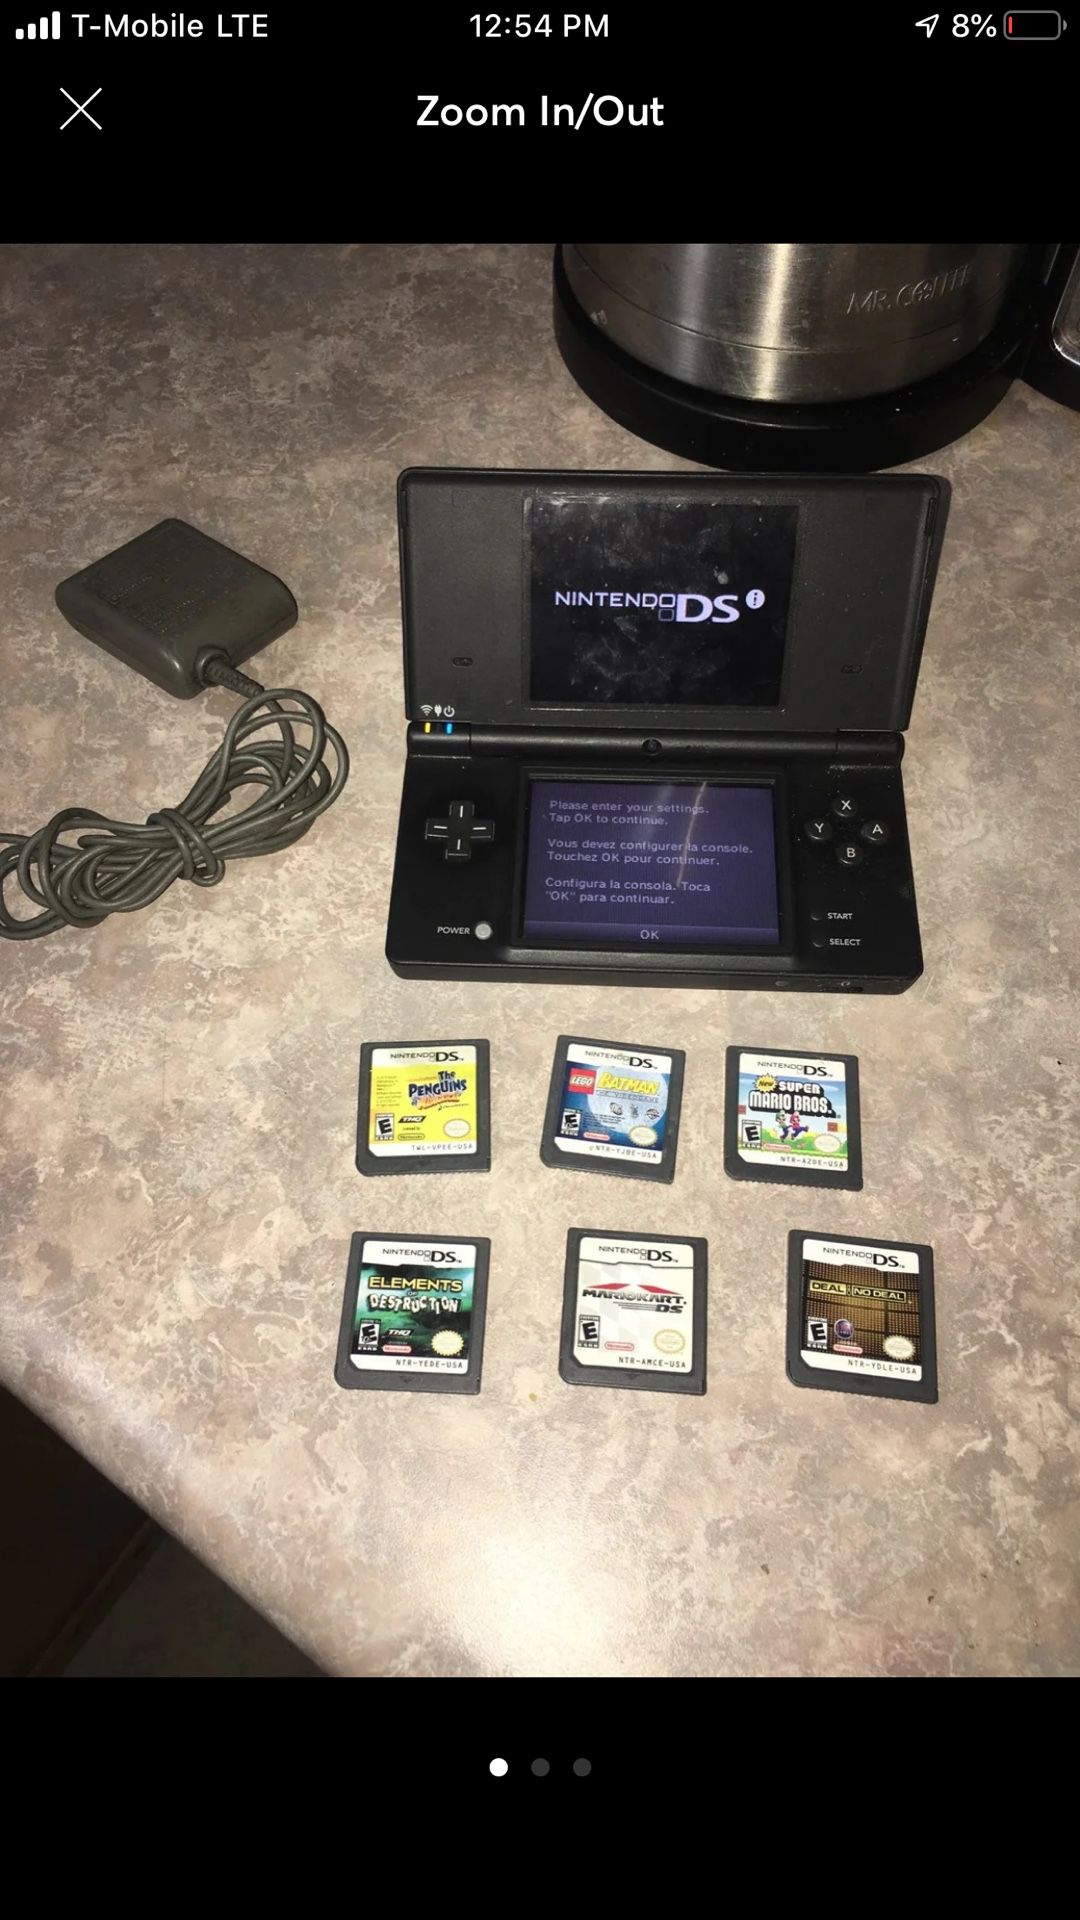 Nintendo DSI with 6 games